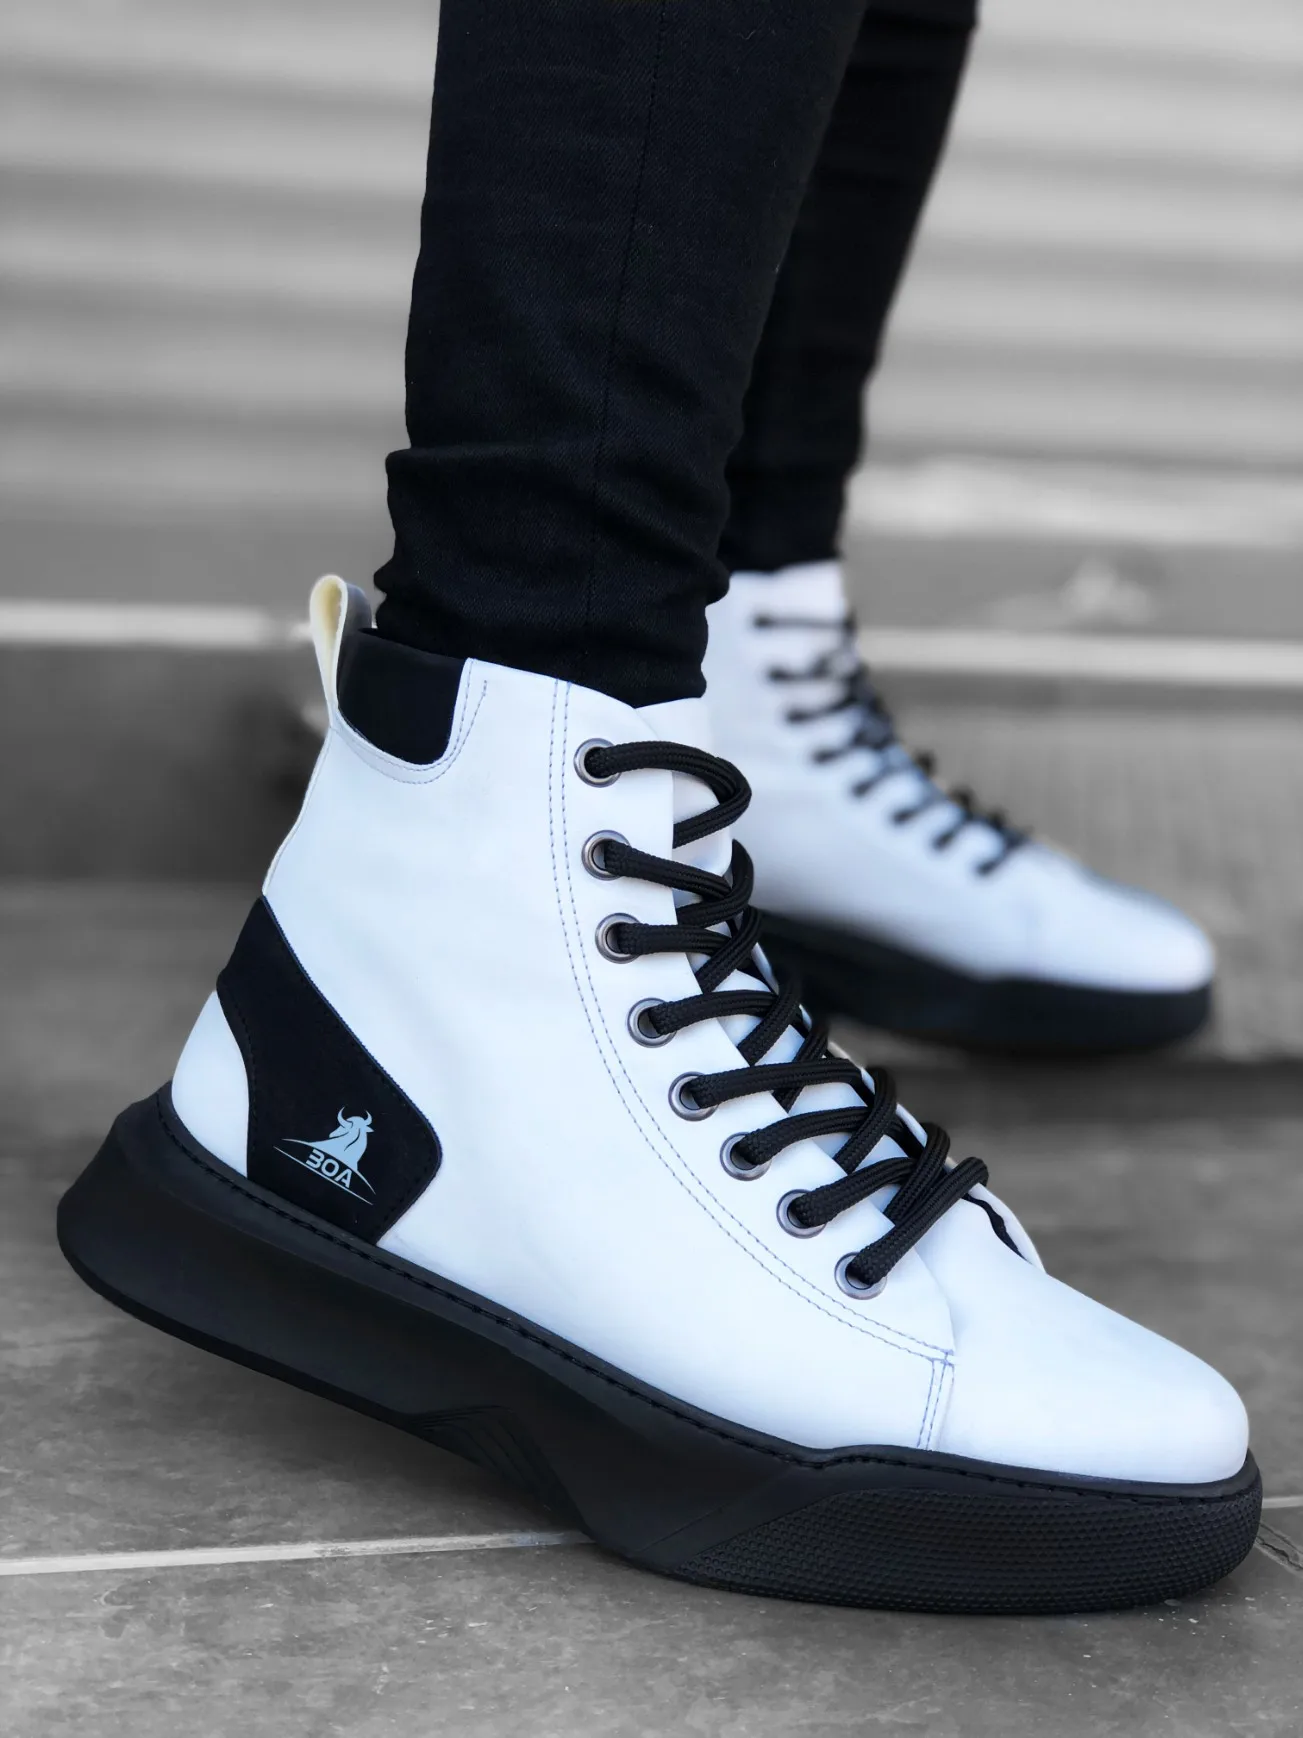 

BA0155 laced men high sole white black sole sports boots